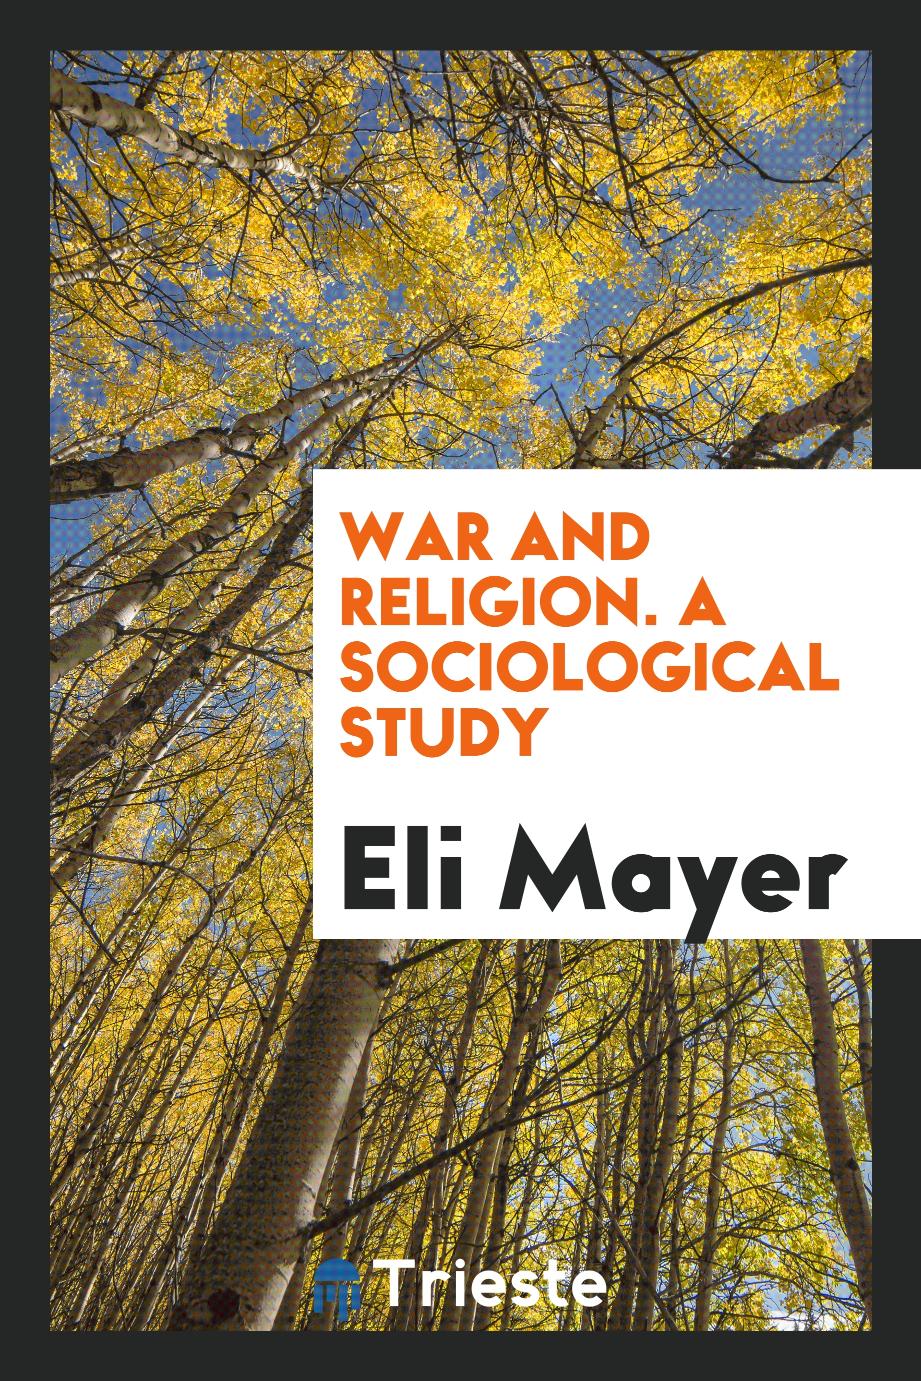 War and Religion. A Sociological Study